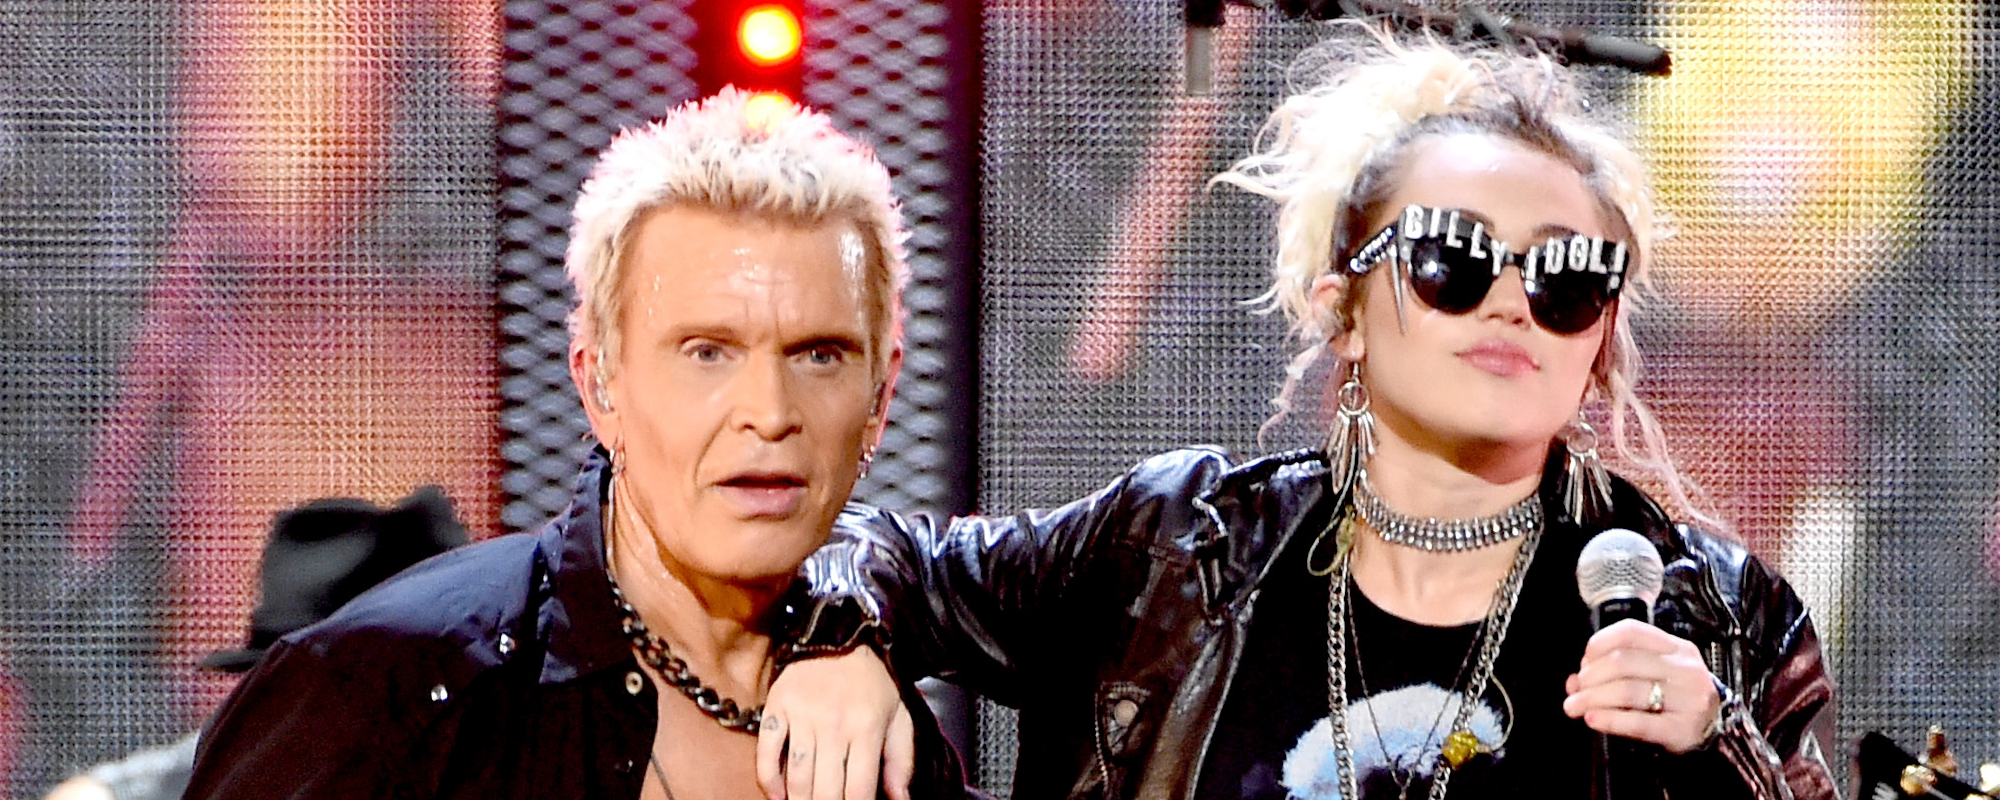 Billy Idol Shares What He Learned When Working With Miley Cyrus on “Night Crawling”